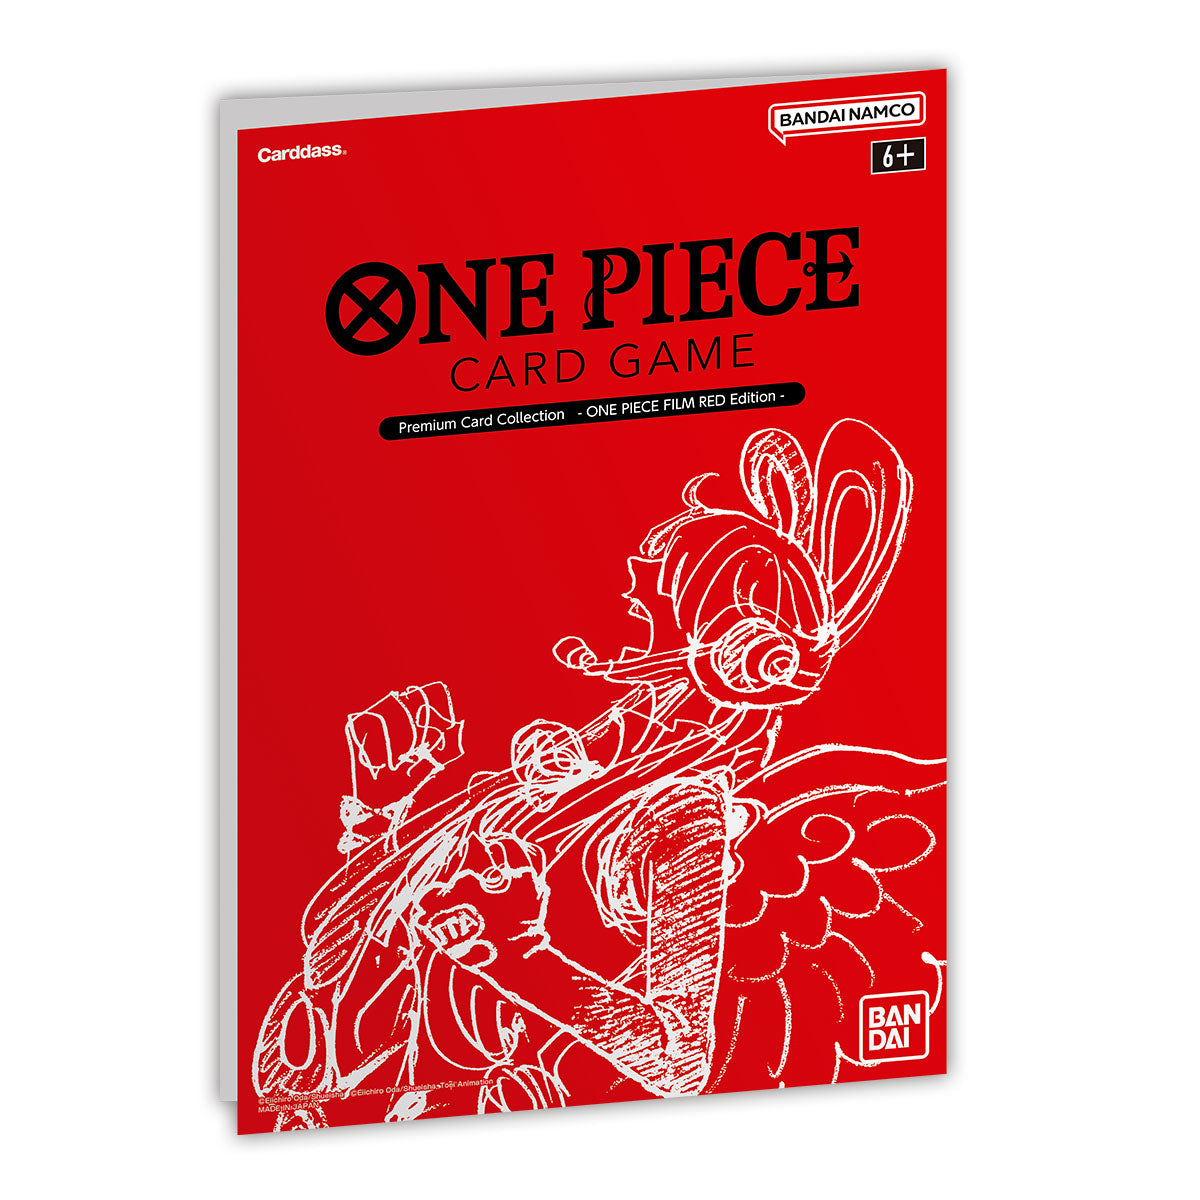 One Piece: Premium Card Collection - Film Red Edition